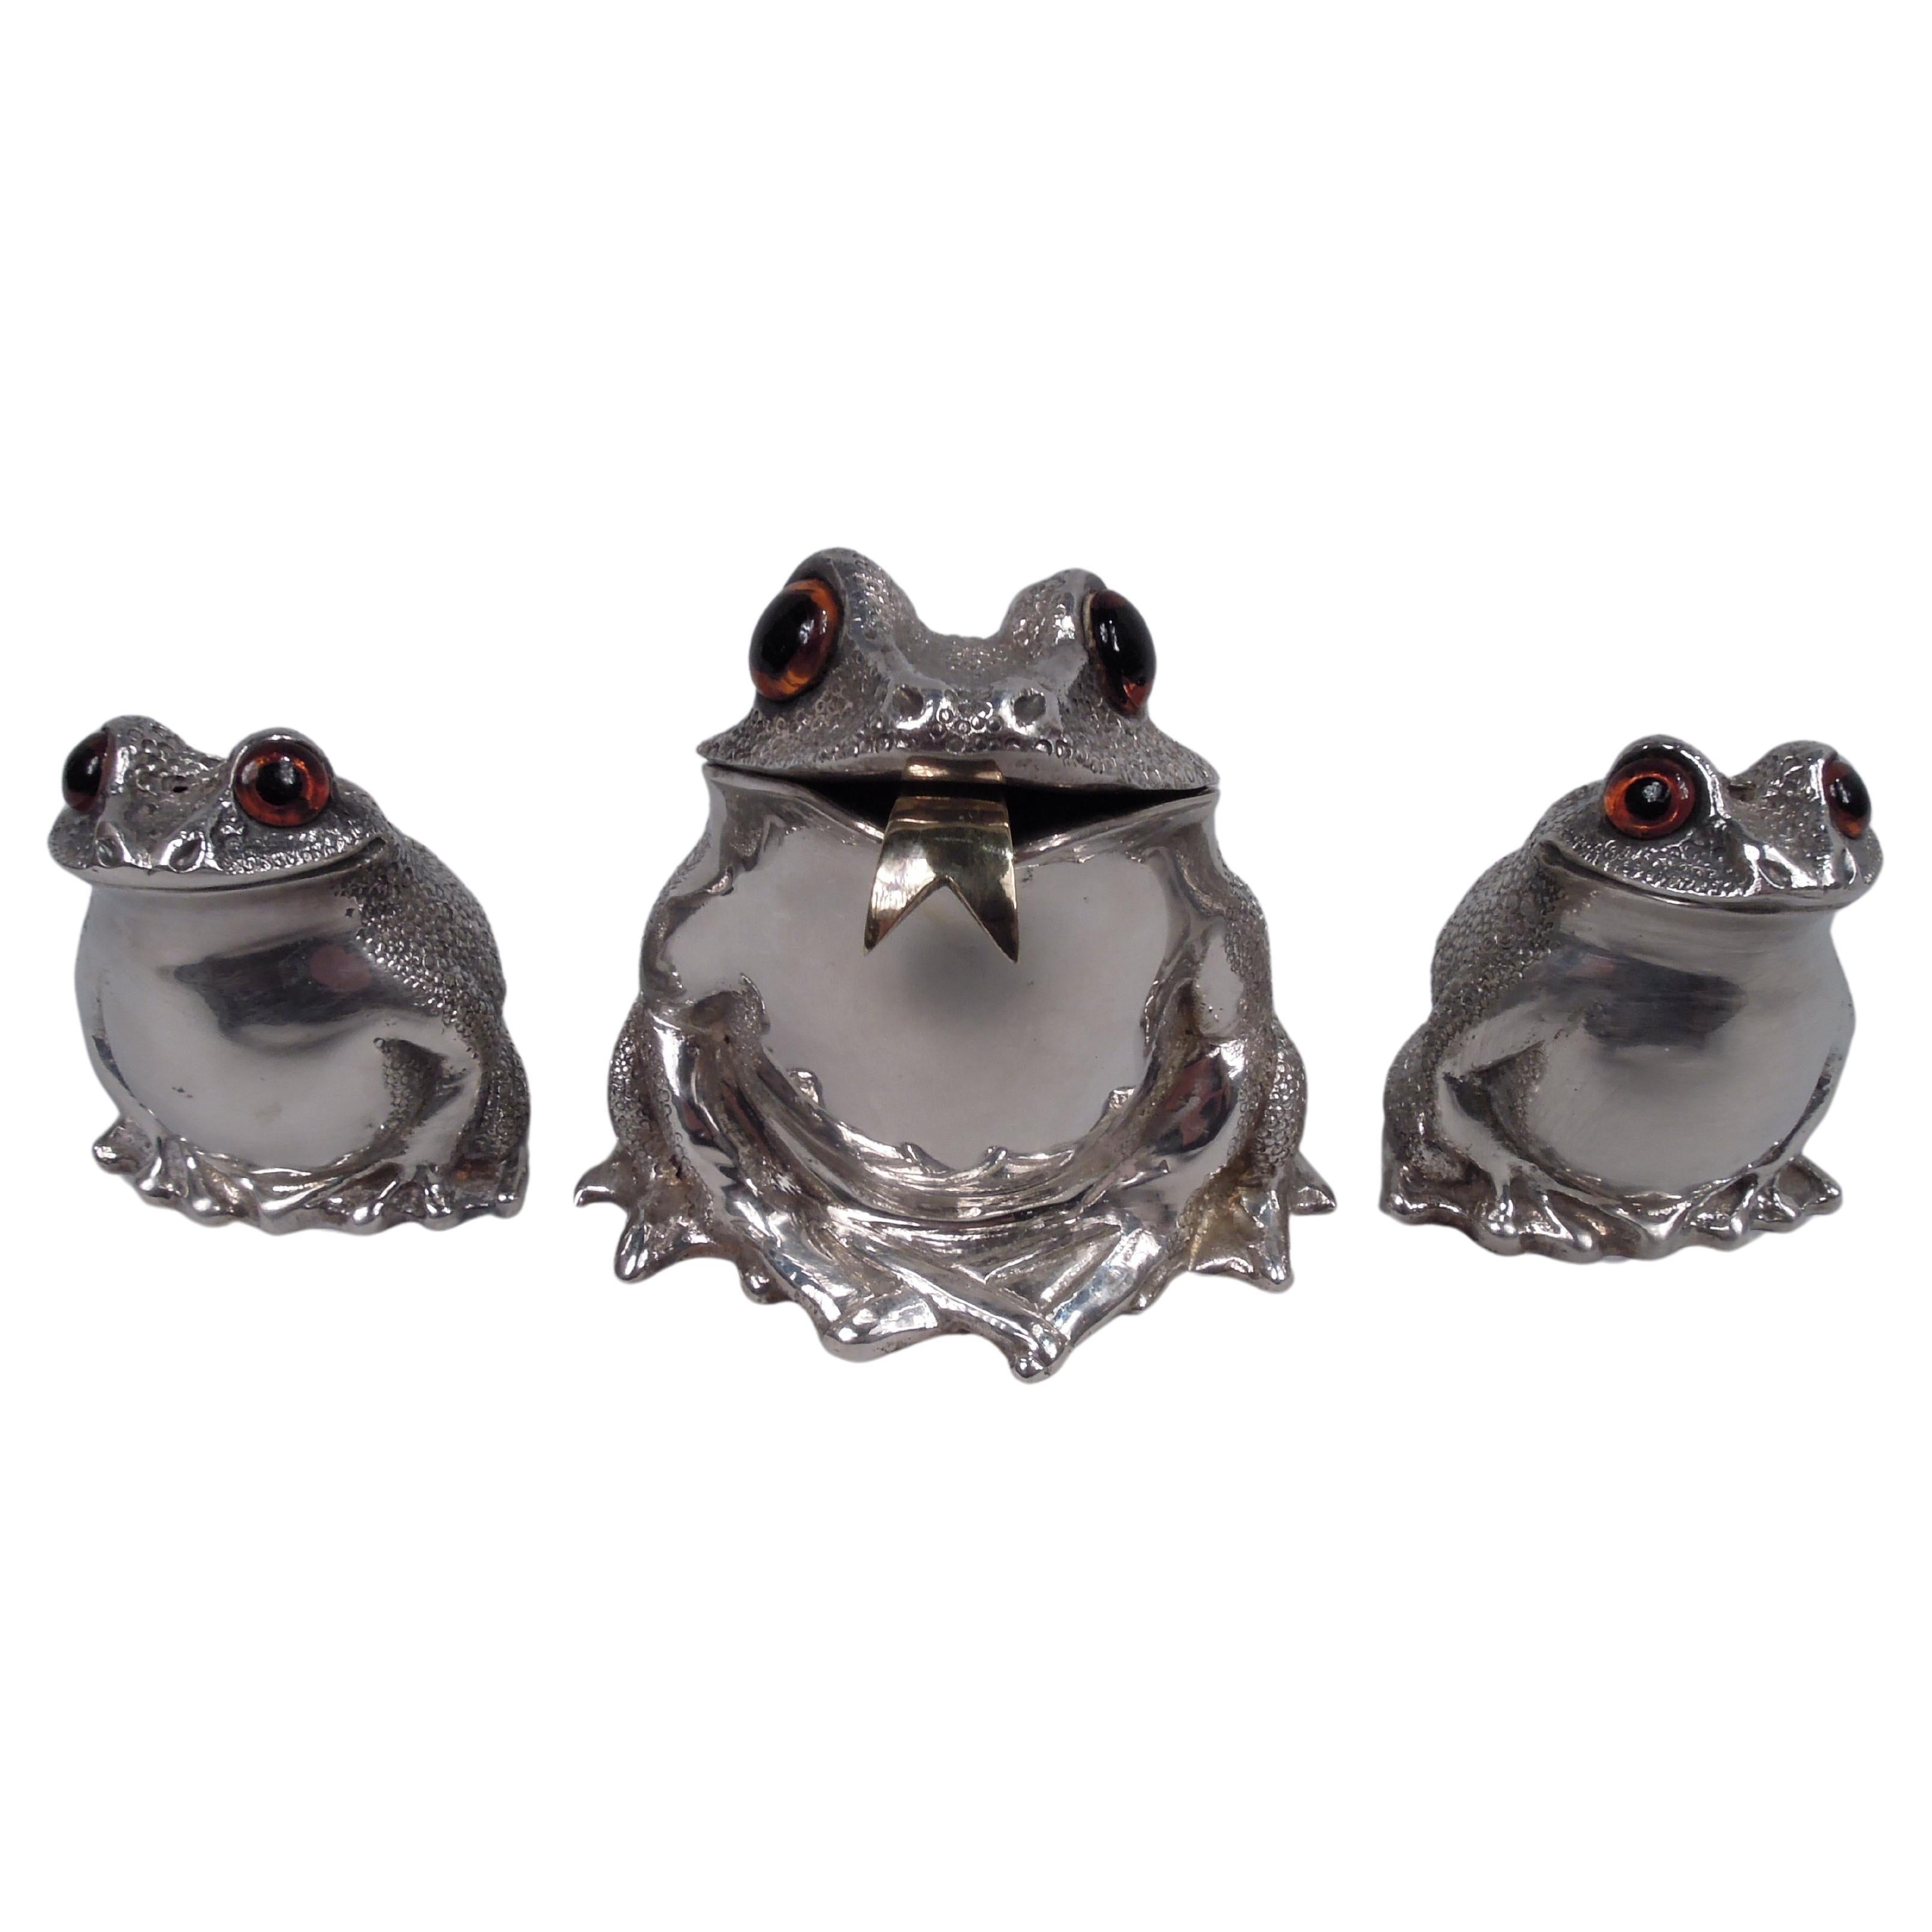 Comyns English Frog Condiment Set with Mustard Pot & Shakers, 1980